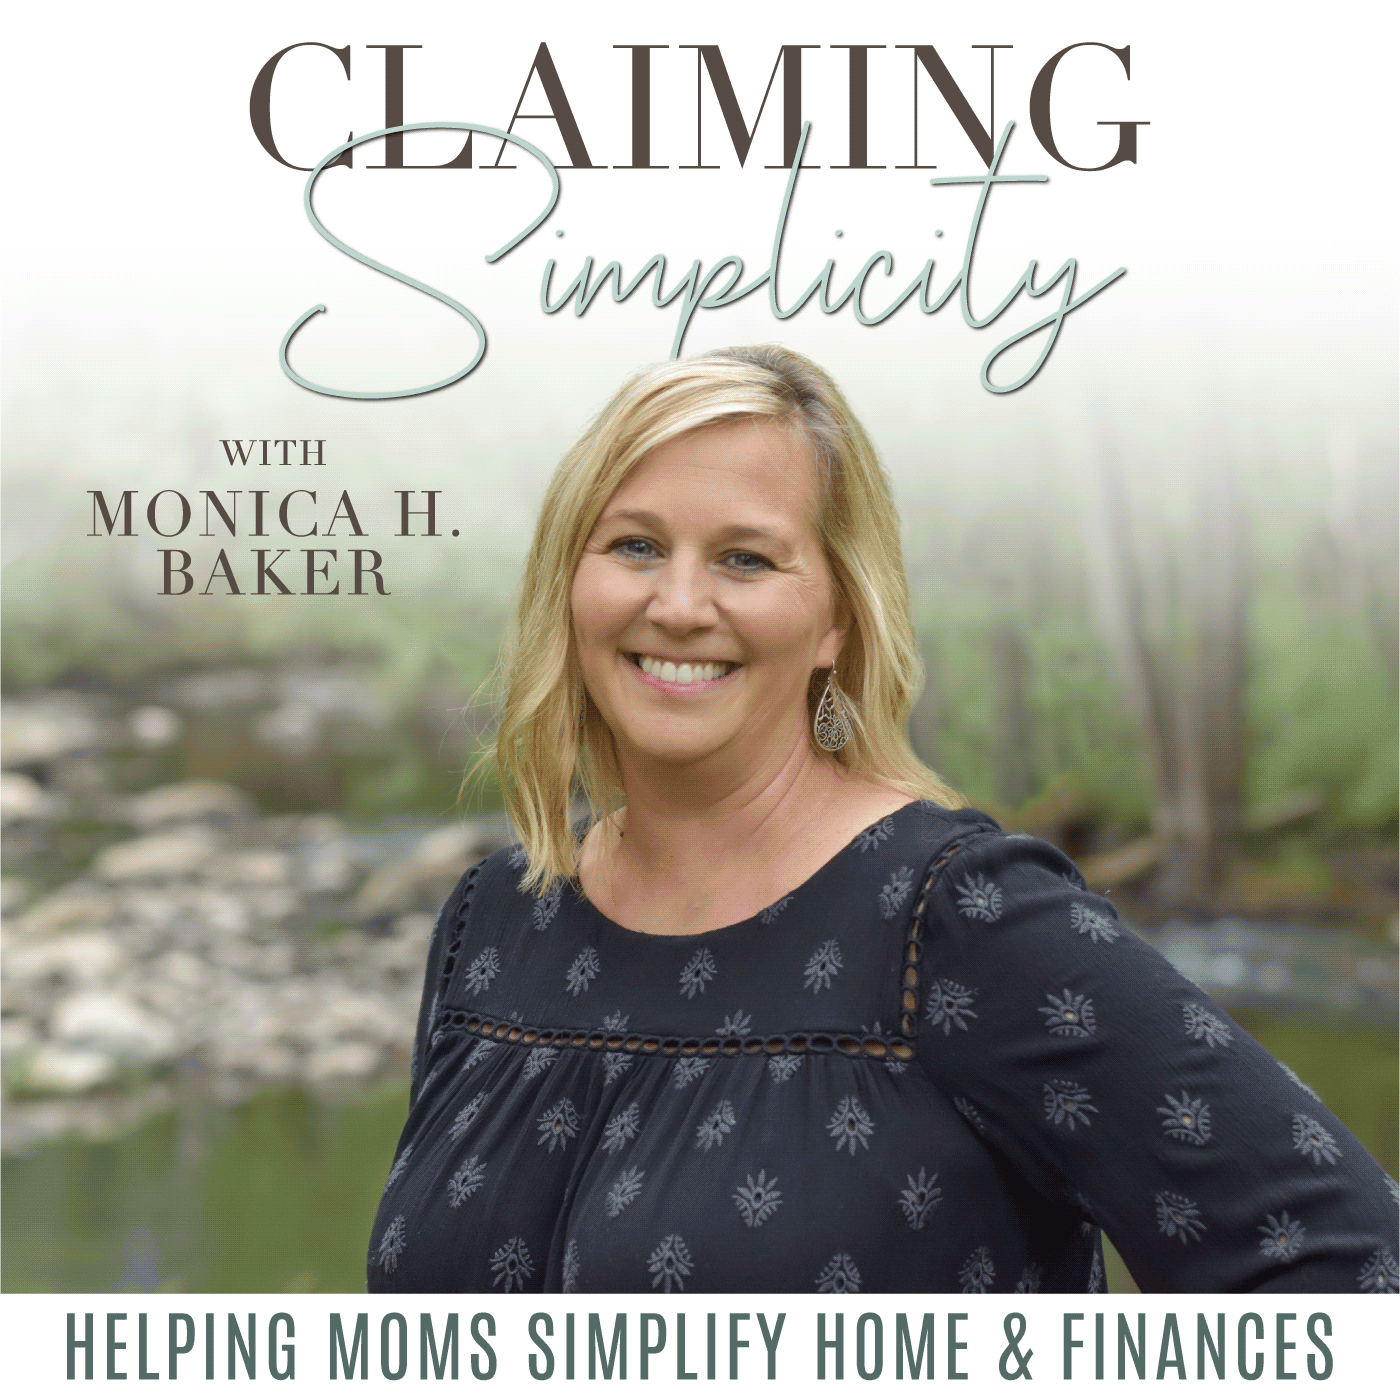 Claiming Simplicity - Homestead, Non Toxic Living, Cooking From Scratch, Gardening, Preserving, Raising Chickens, Simple Living, Christian, Homemaker, Frugal, Slow Living, Natural Home, Save Money